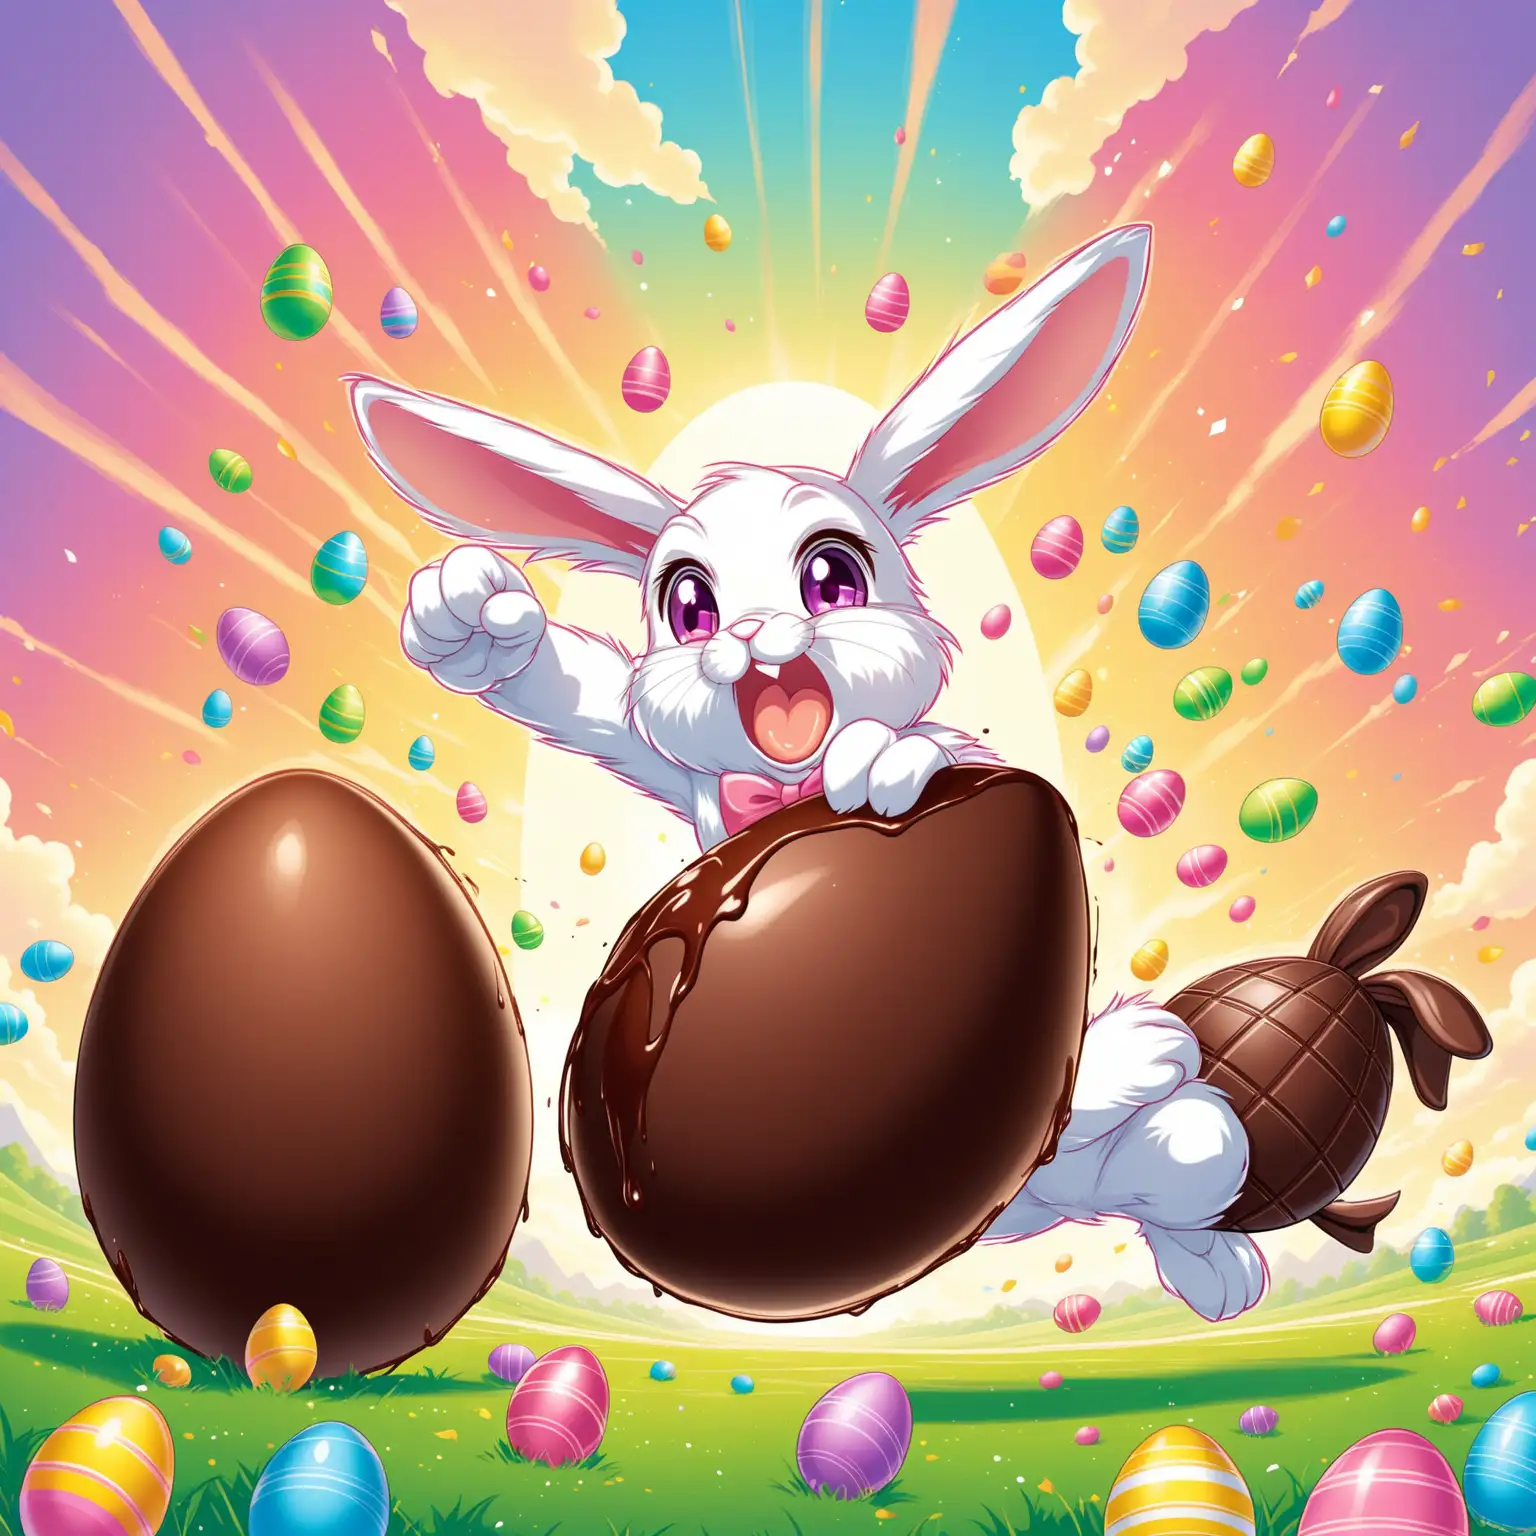 Easter Bunny Battling a Giant Chocolate Egg